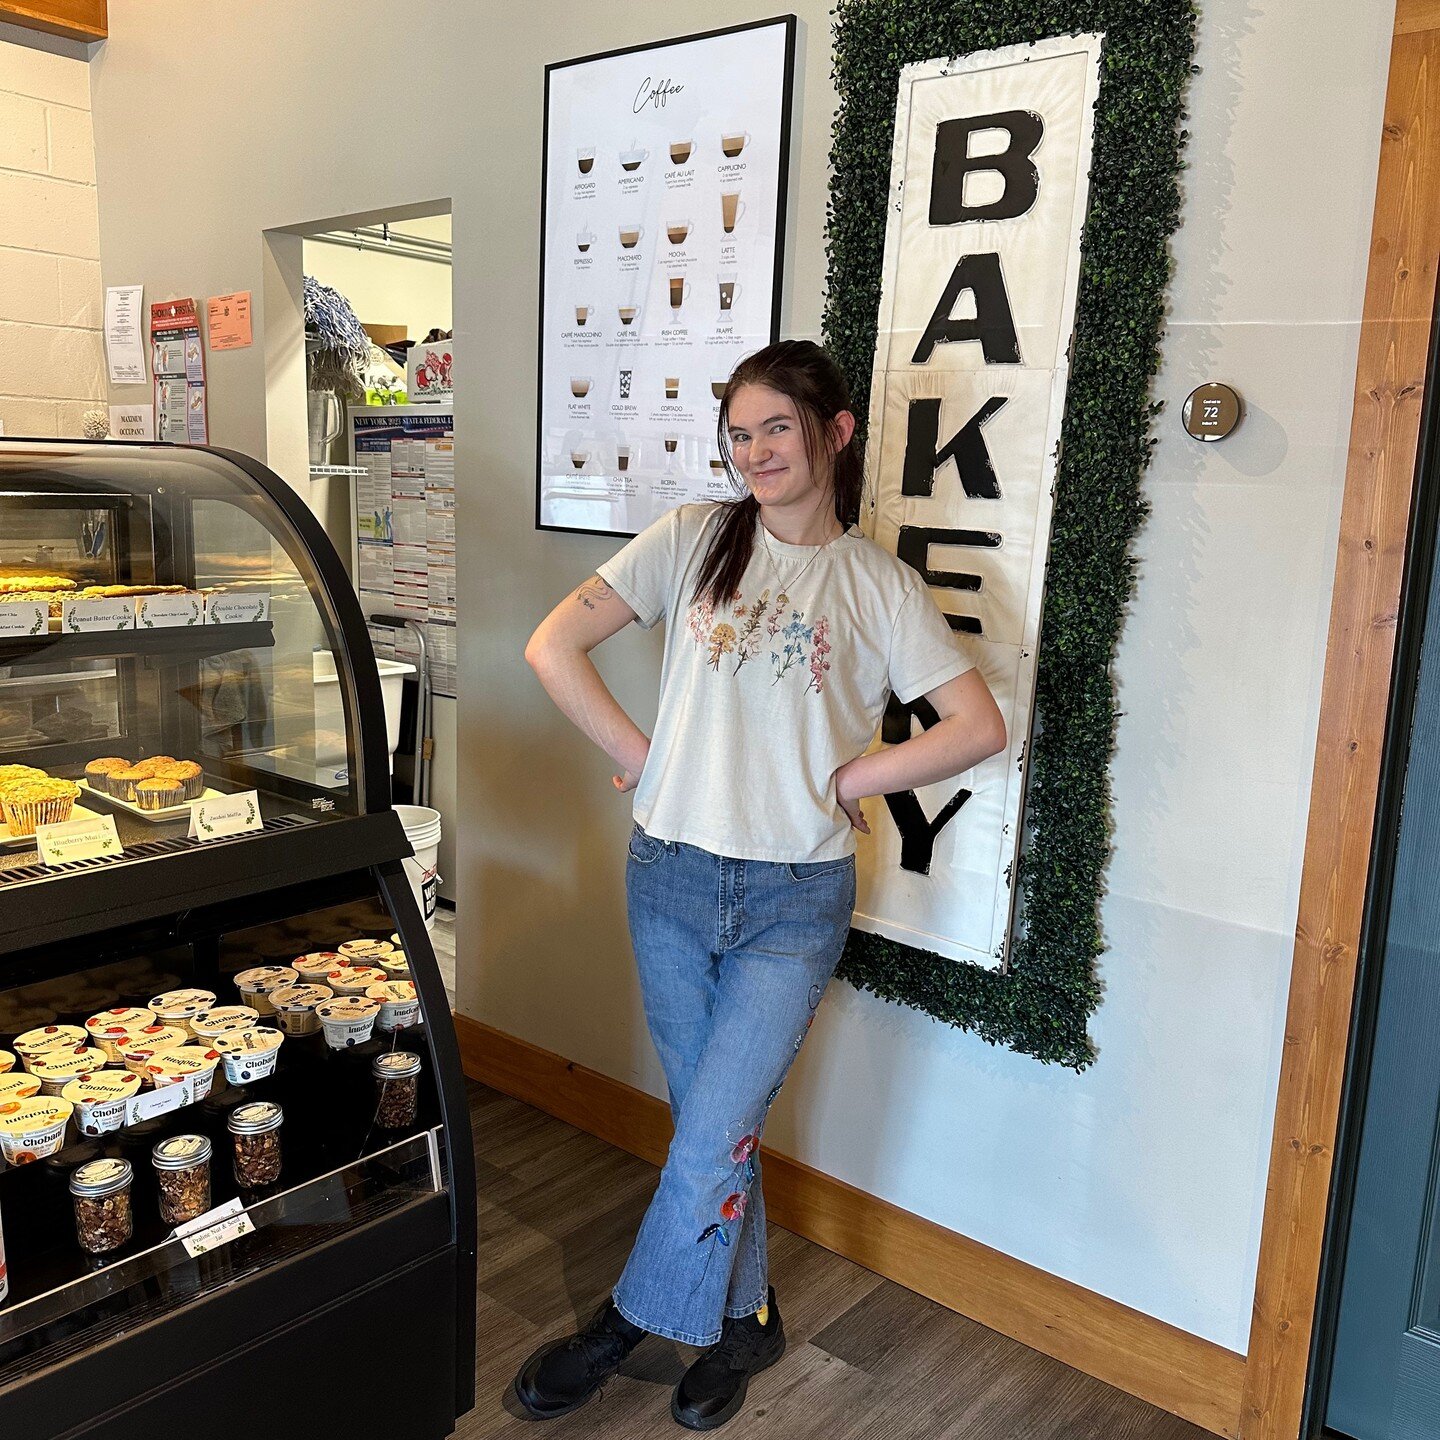 ⭐️EMPLOYEE SPOTLIGHT TIME⭐️

Say hello to Kendall, everyone's favorite Senior Barista and longest standing GTR Team Member!

If Kendall isn't whipping up a Minty Matcha here, you can find her dishing out GTR coffee at Leeds' very own @gracies_ny 

Ke